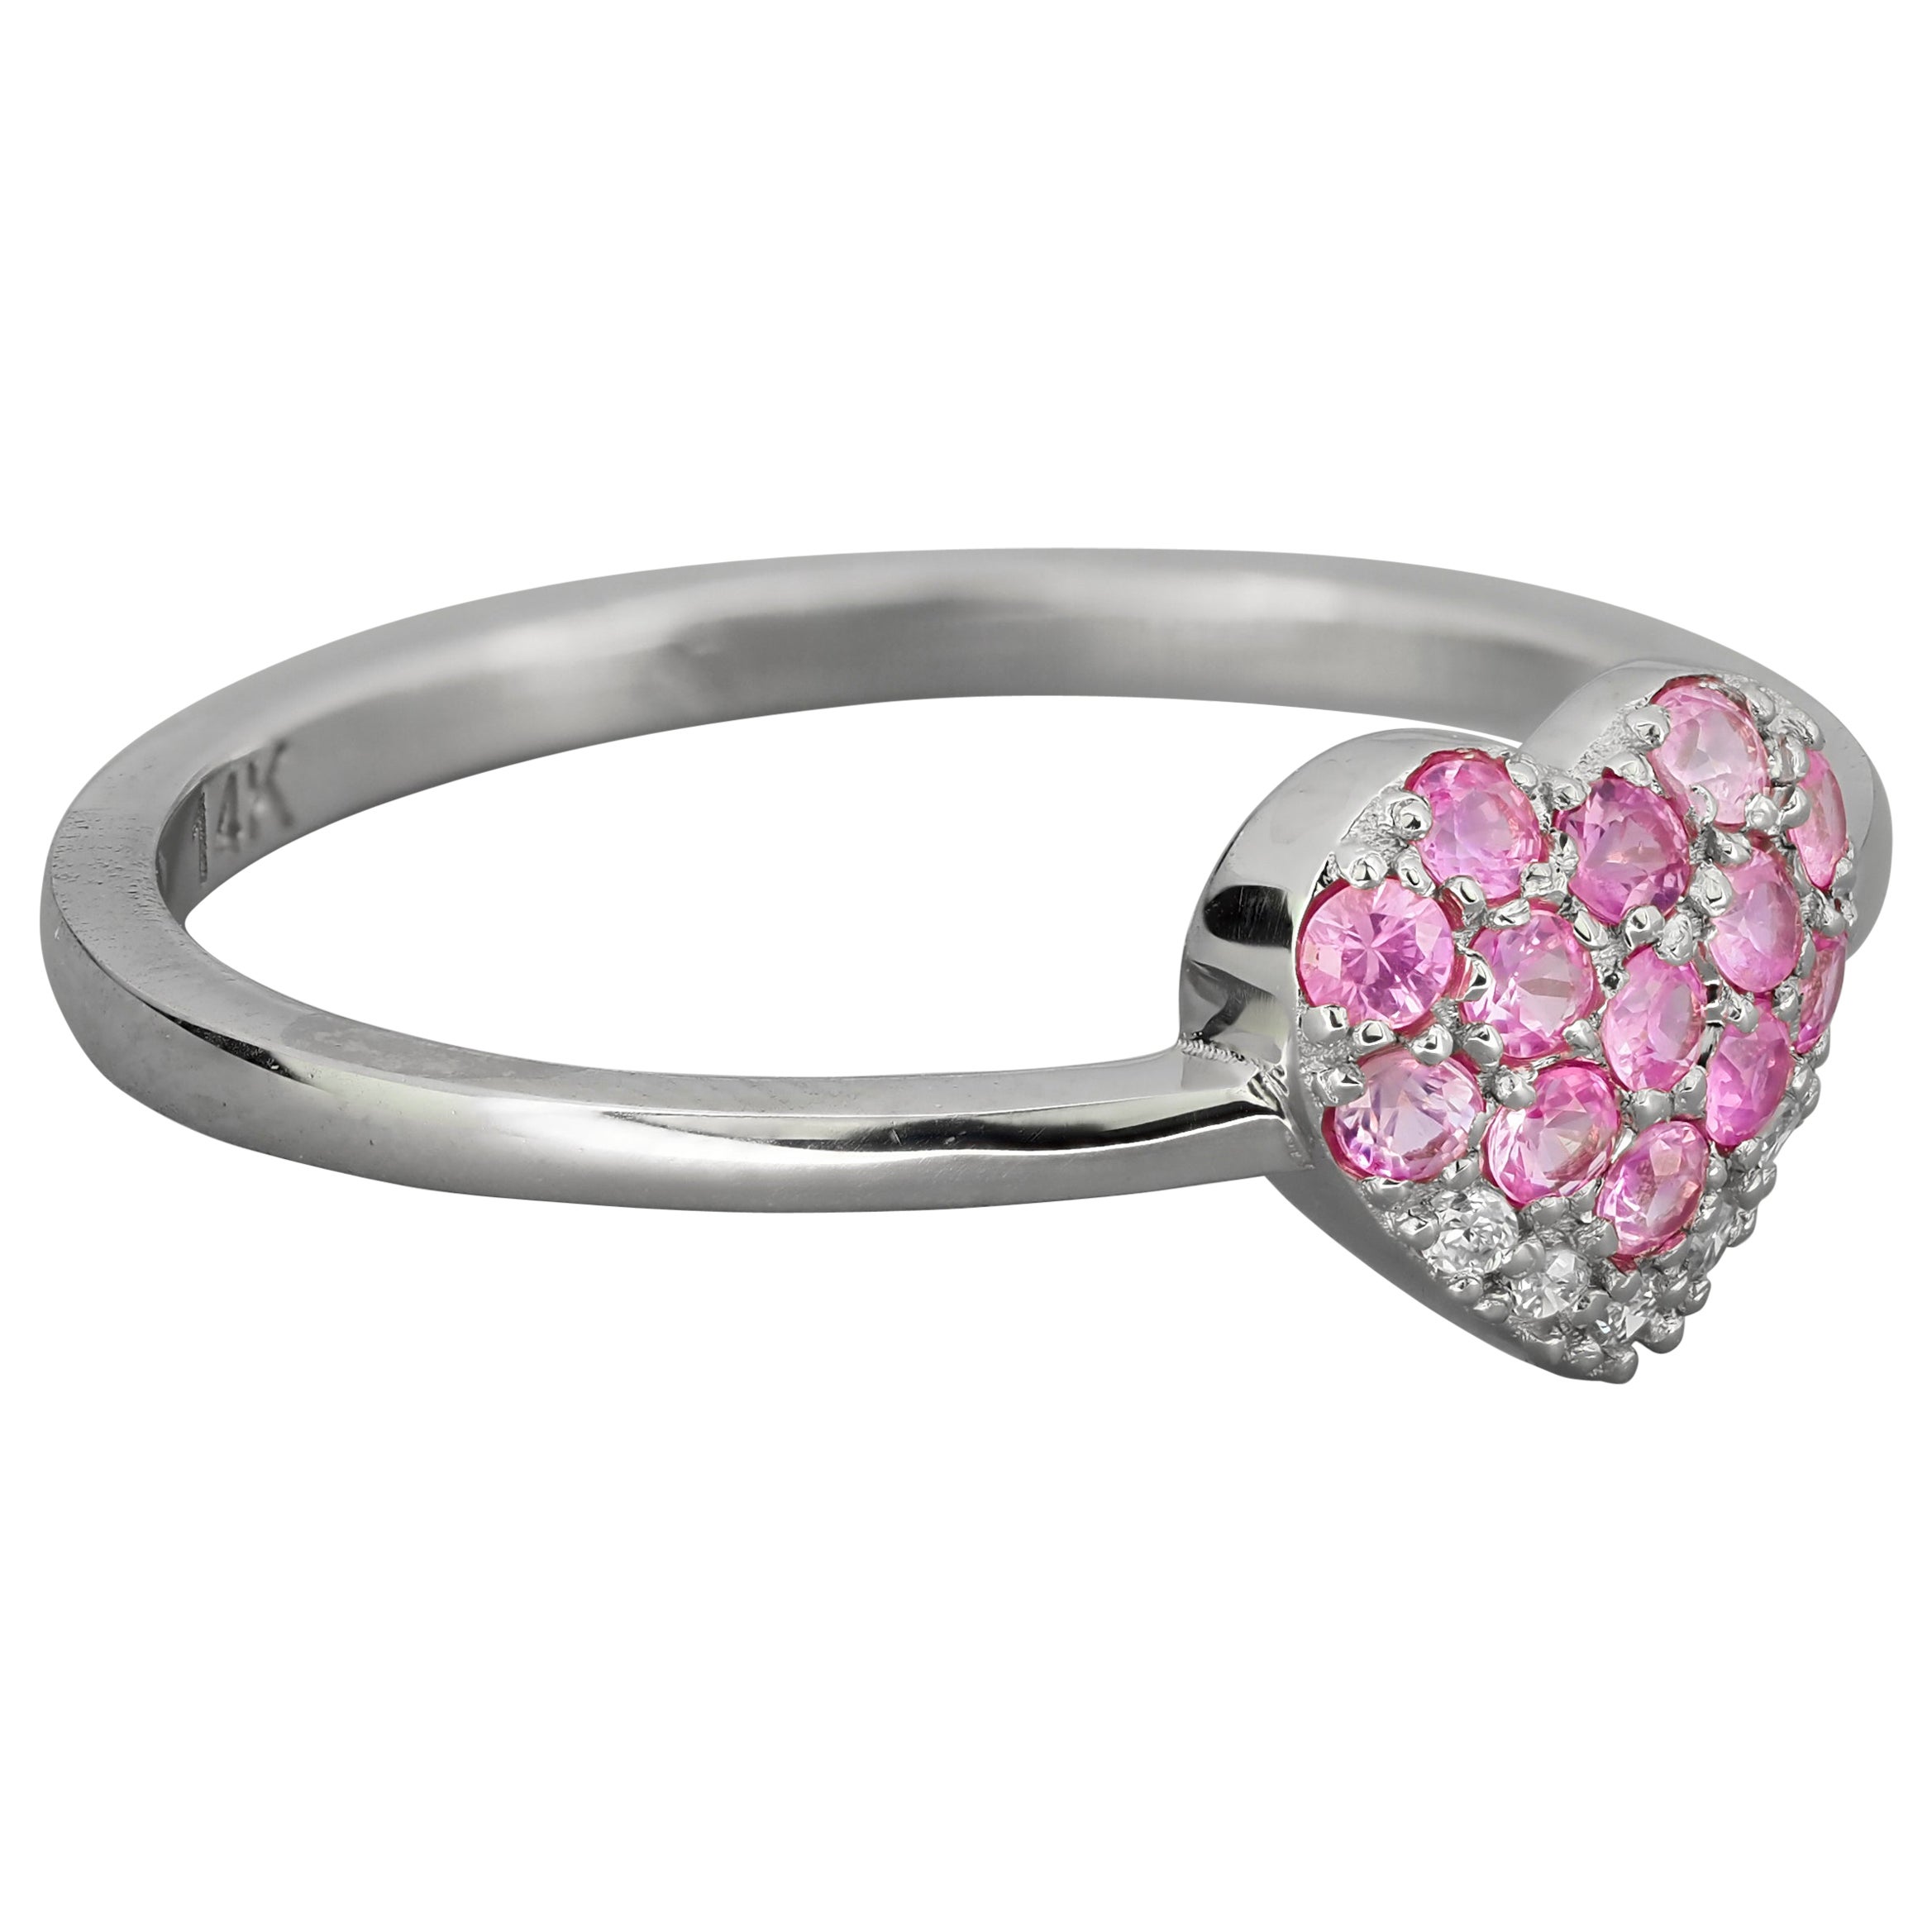 For Sale:  Heart Shaped Gold Ring with Pink Sapphires